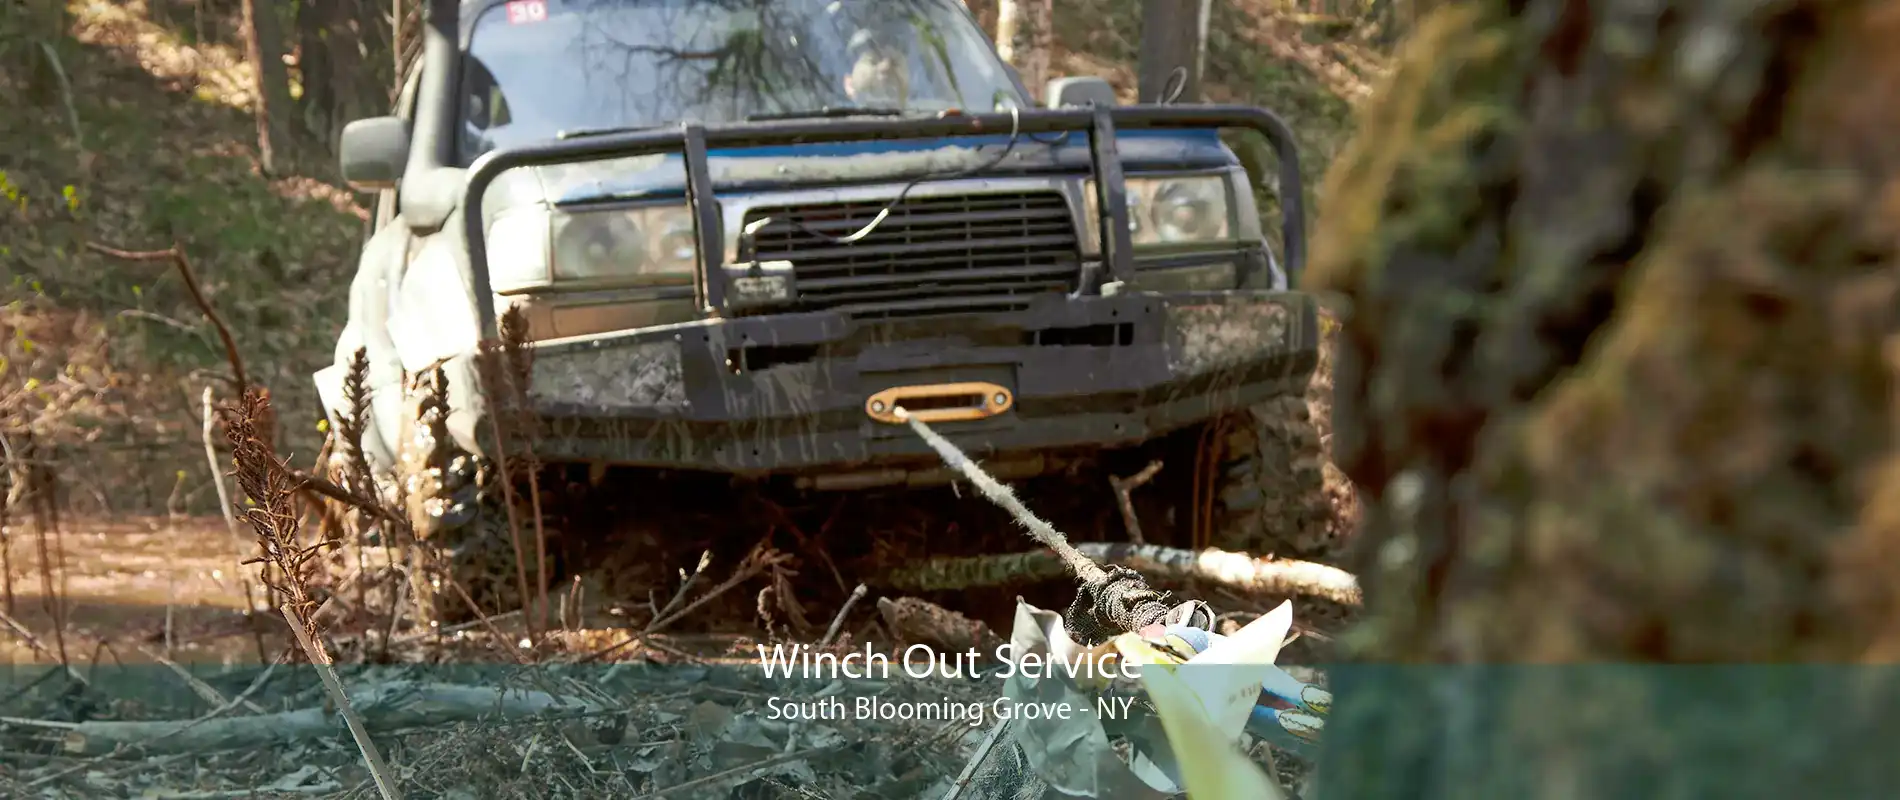 Winch Out Service South Blooming Grove - NY